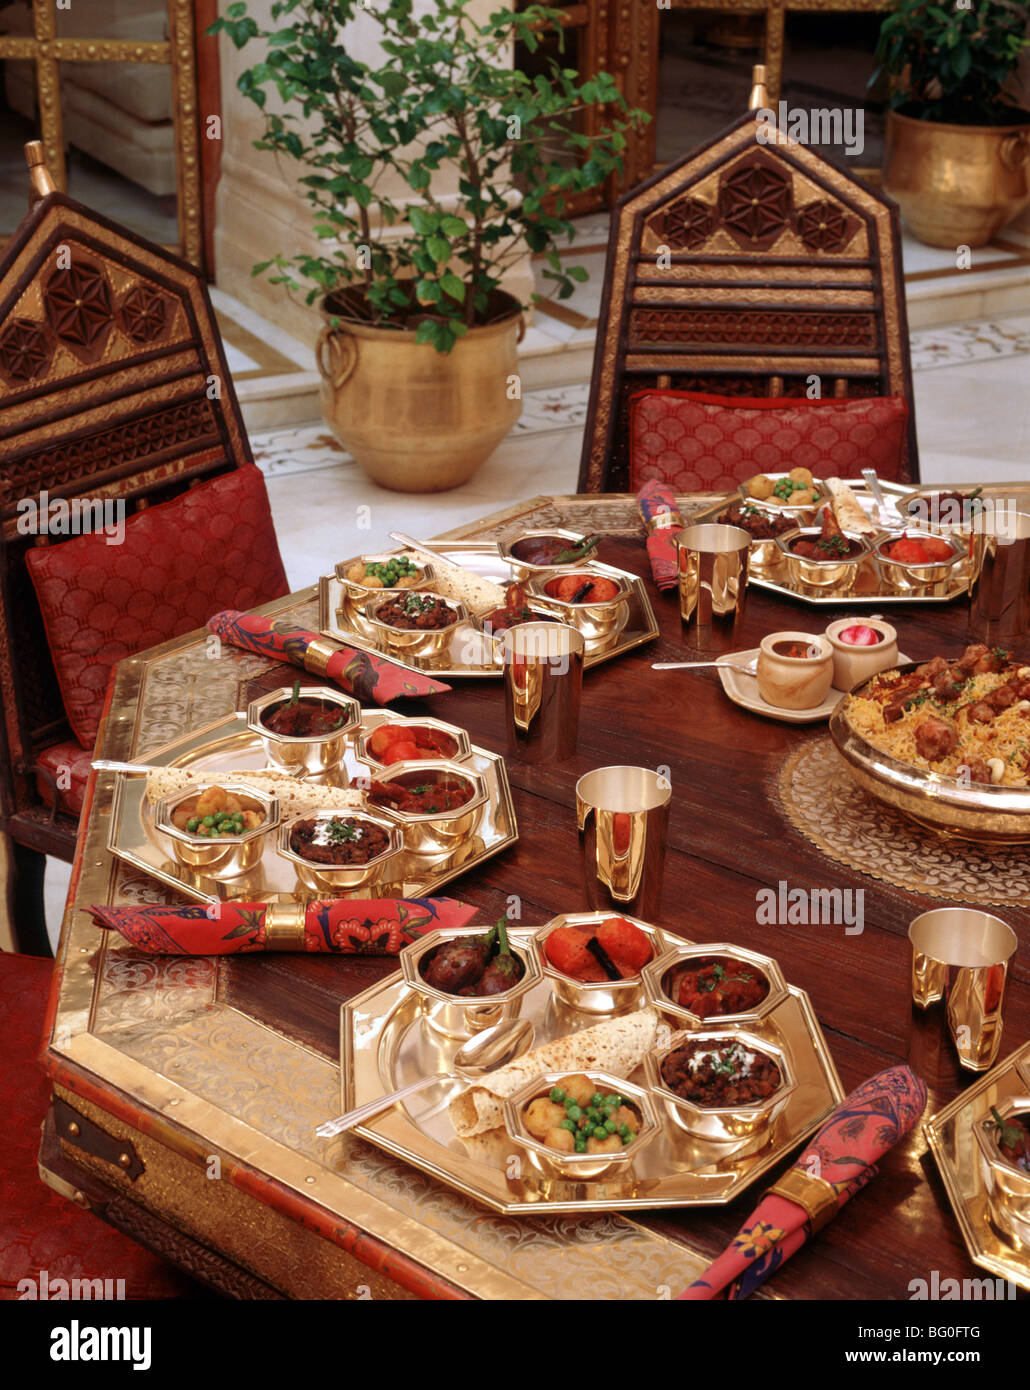 Table with Indian Cuisine in India, Asia Stock Photo